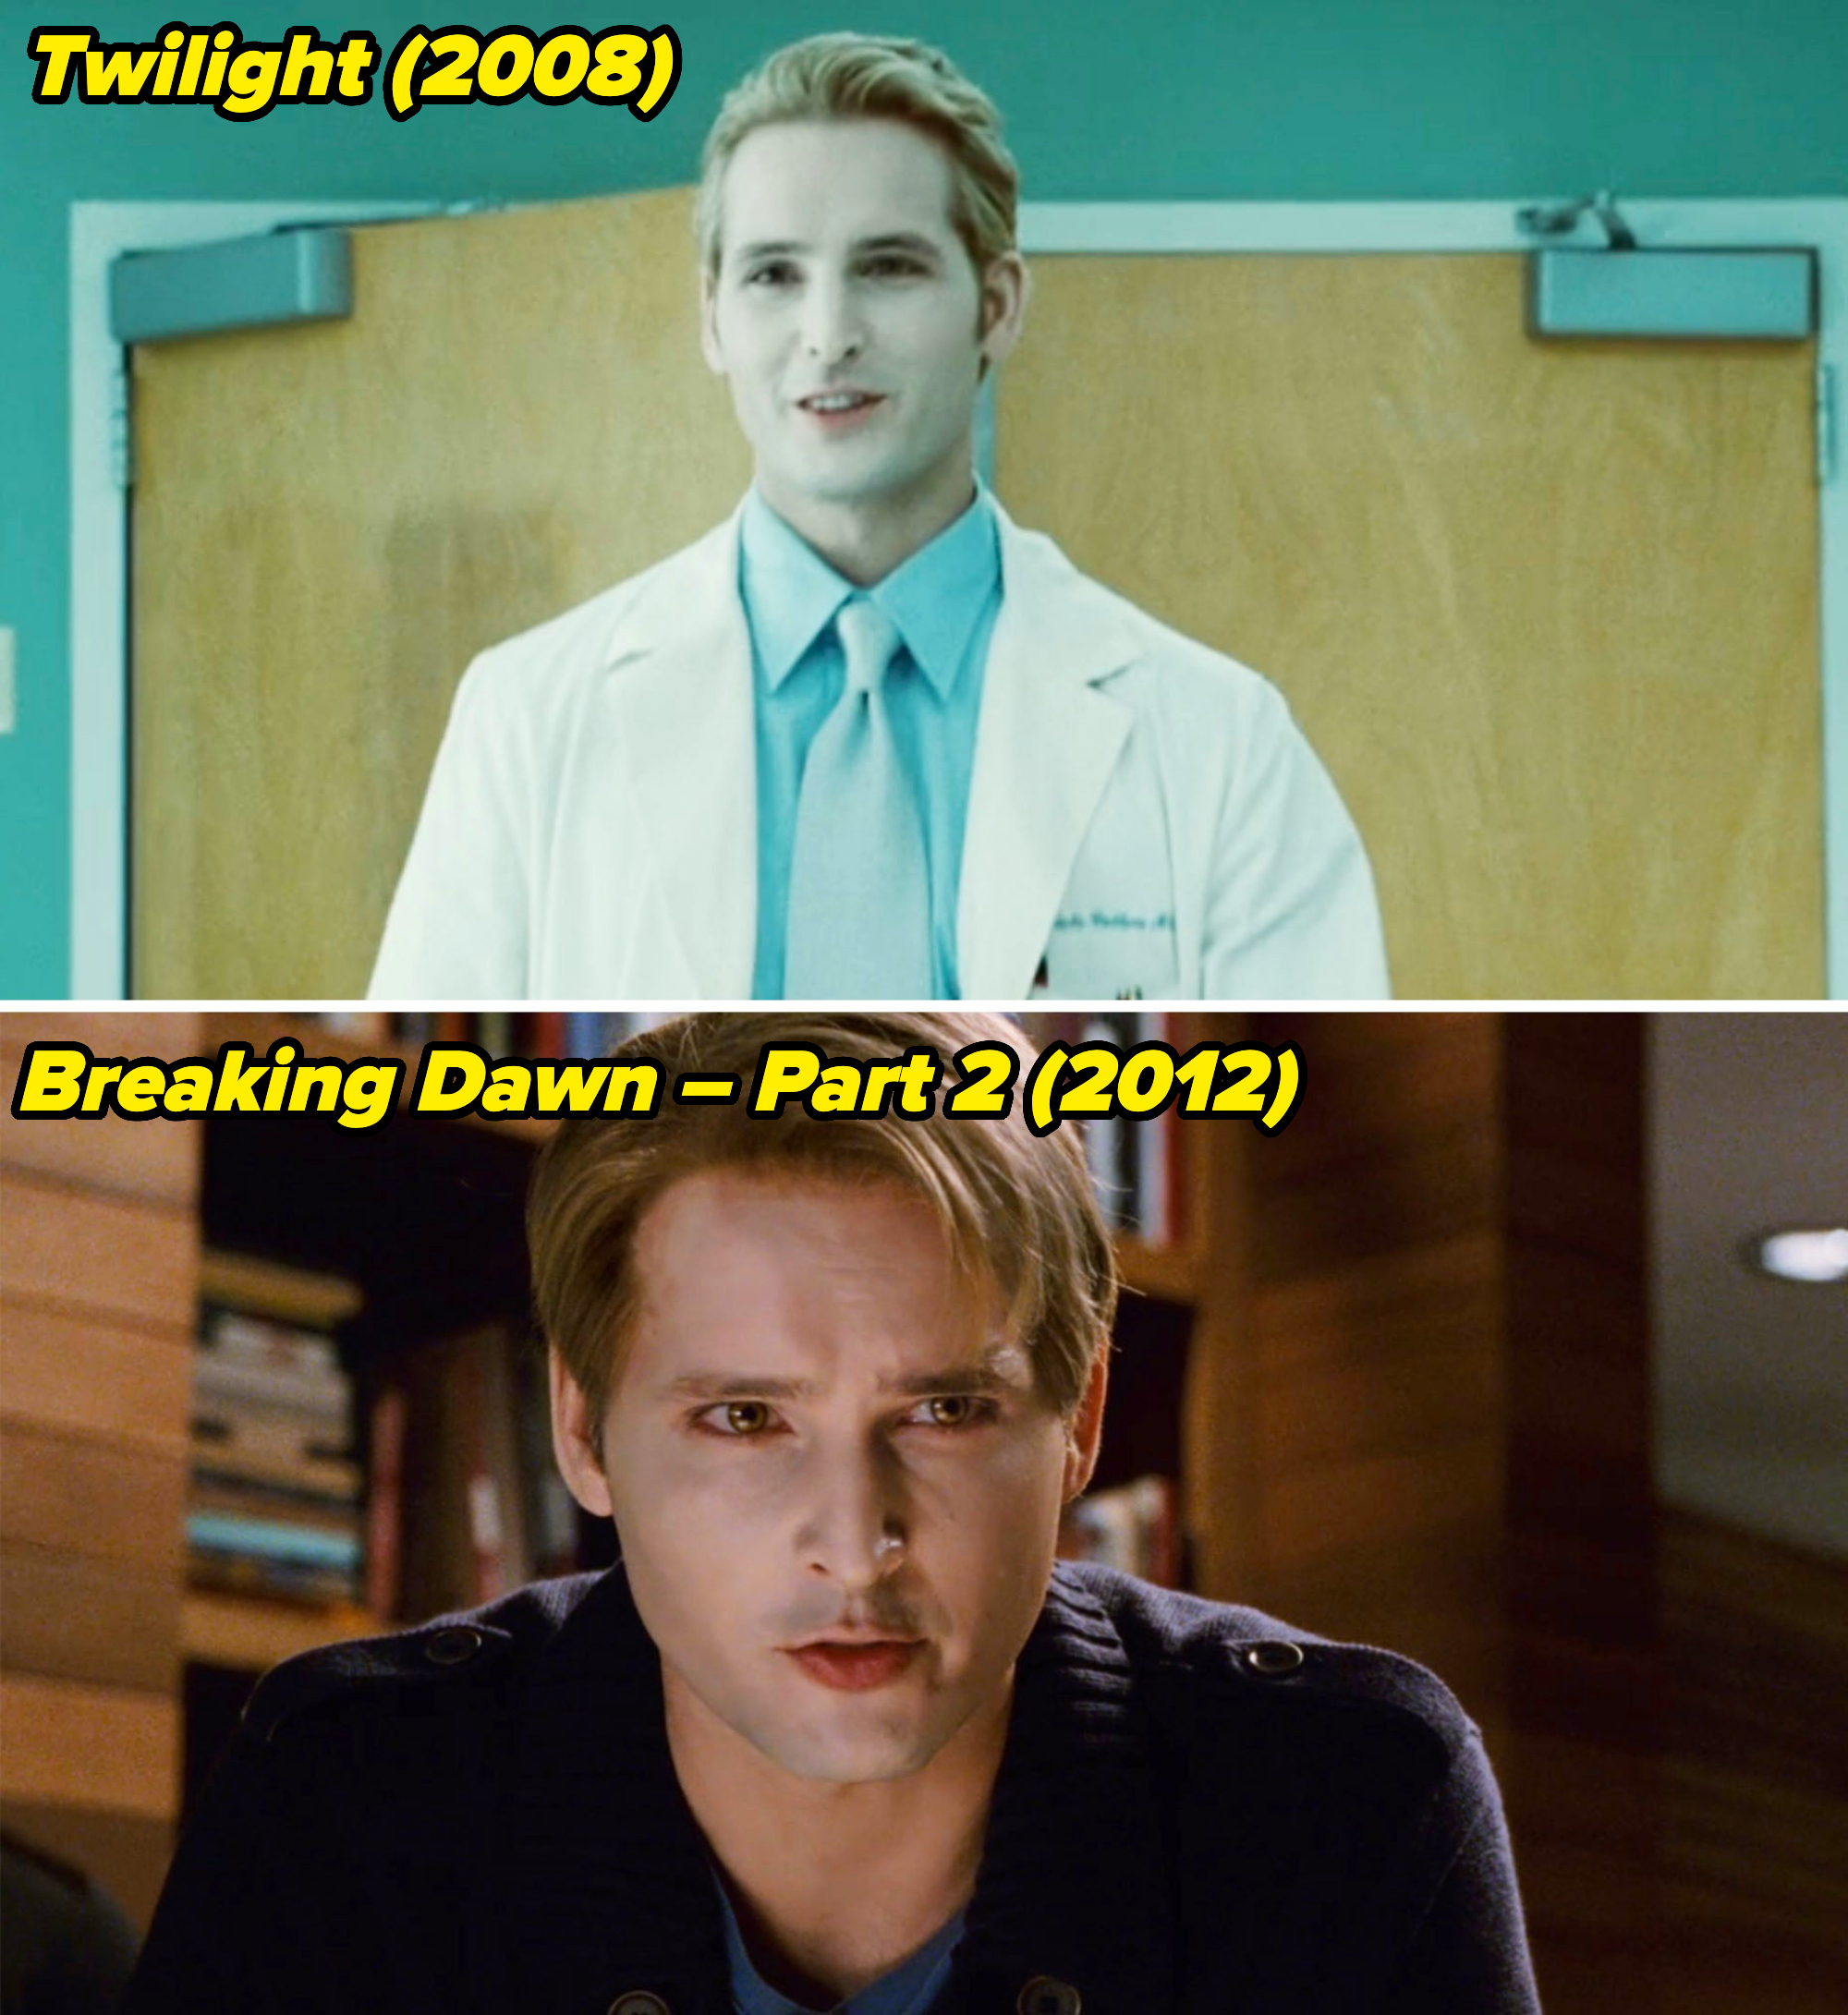 him wearing a doctor&#x27;s coat in the first film and staring intently in a room in the last film